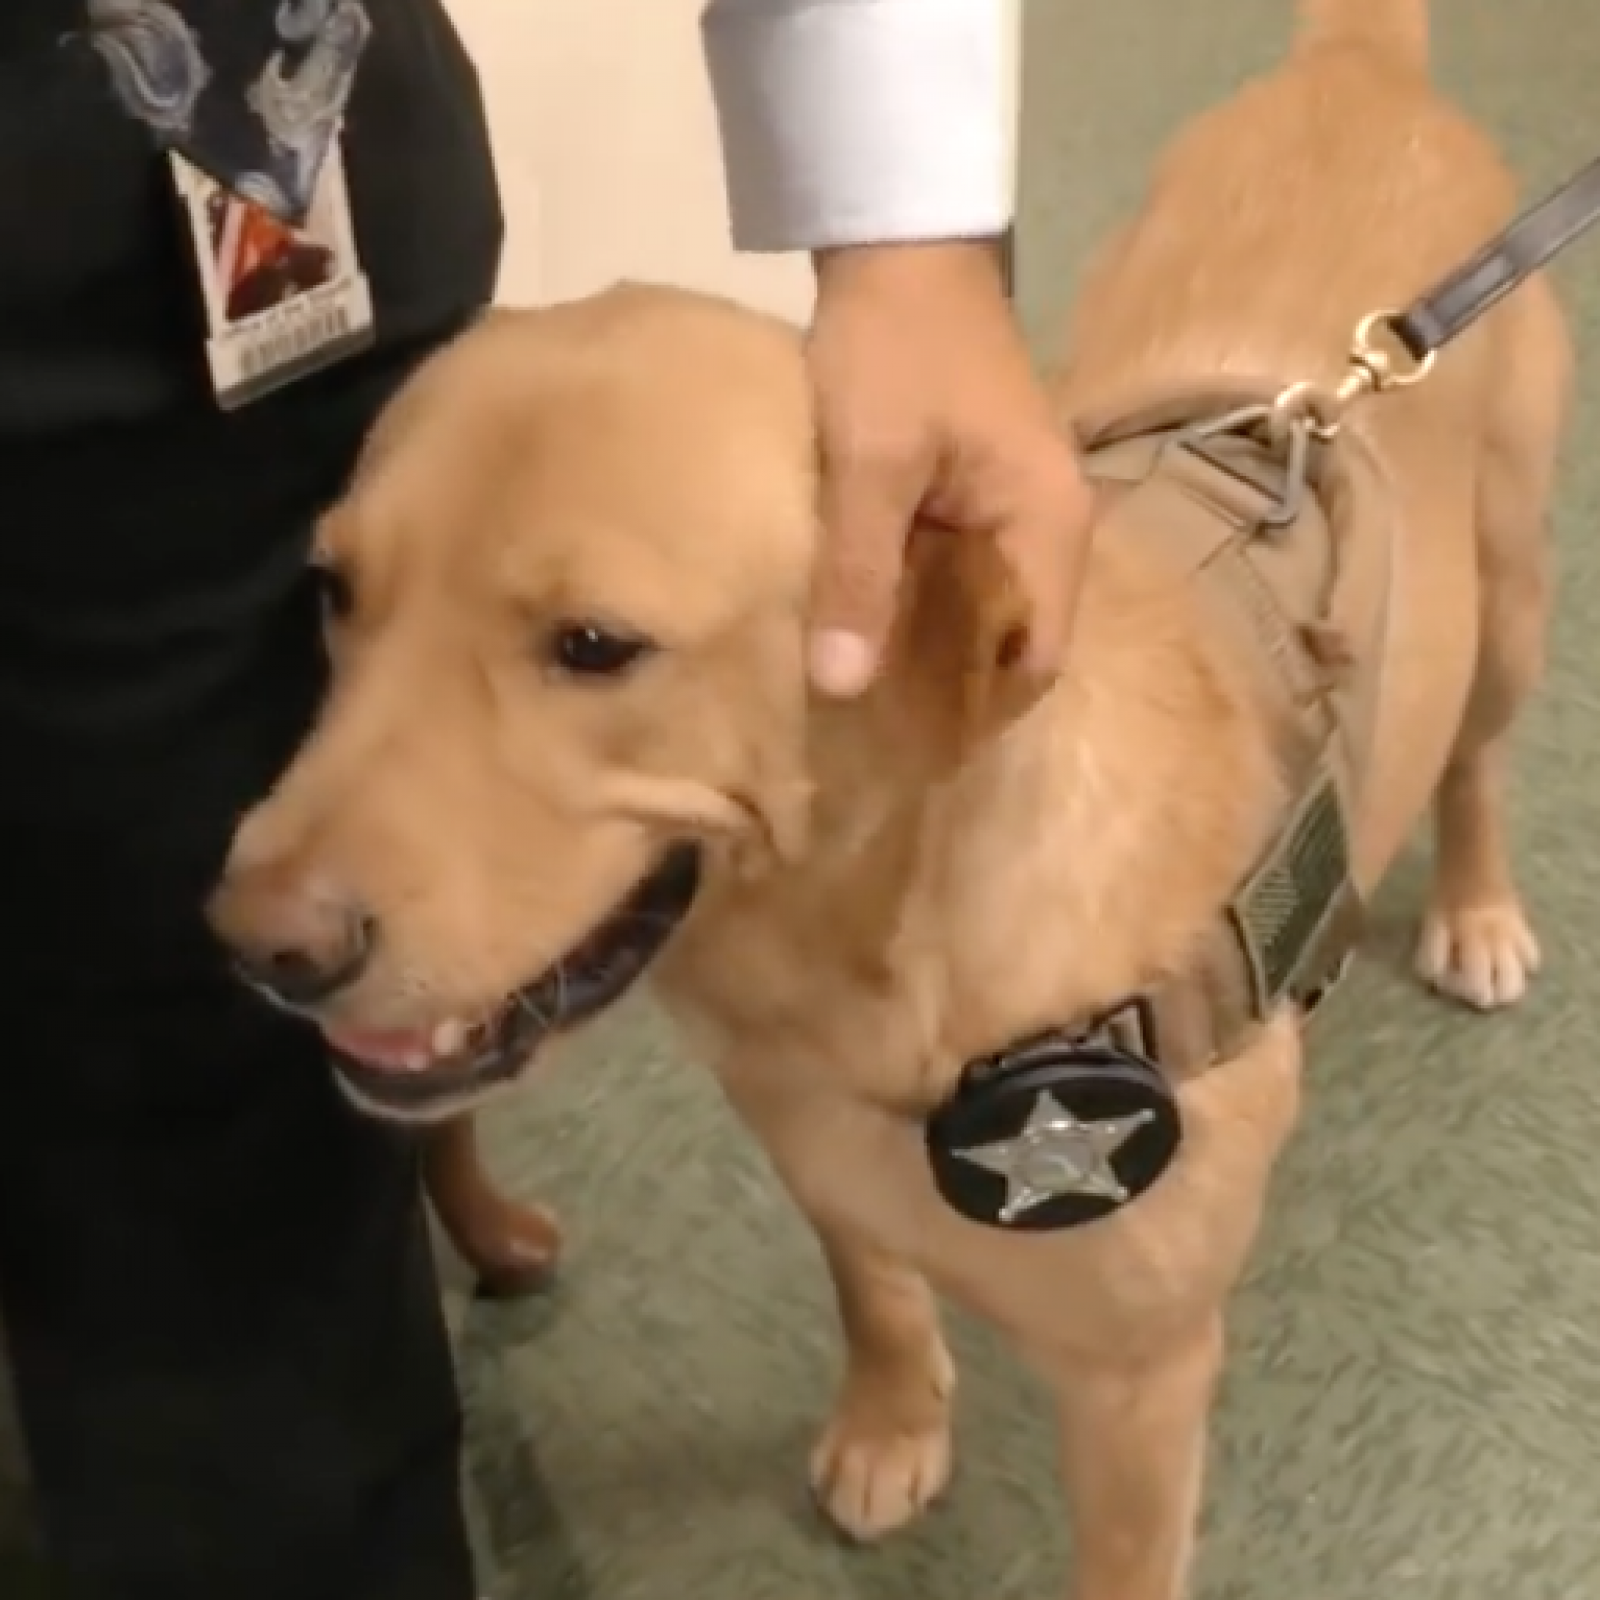 Animaldogxxx - Florida Police Dog Trained to Sniff Out Child Porn on Electronic ...